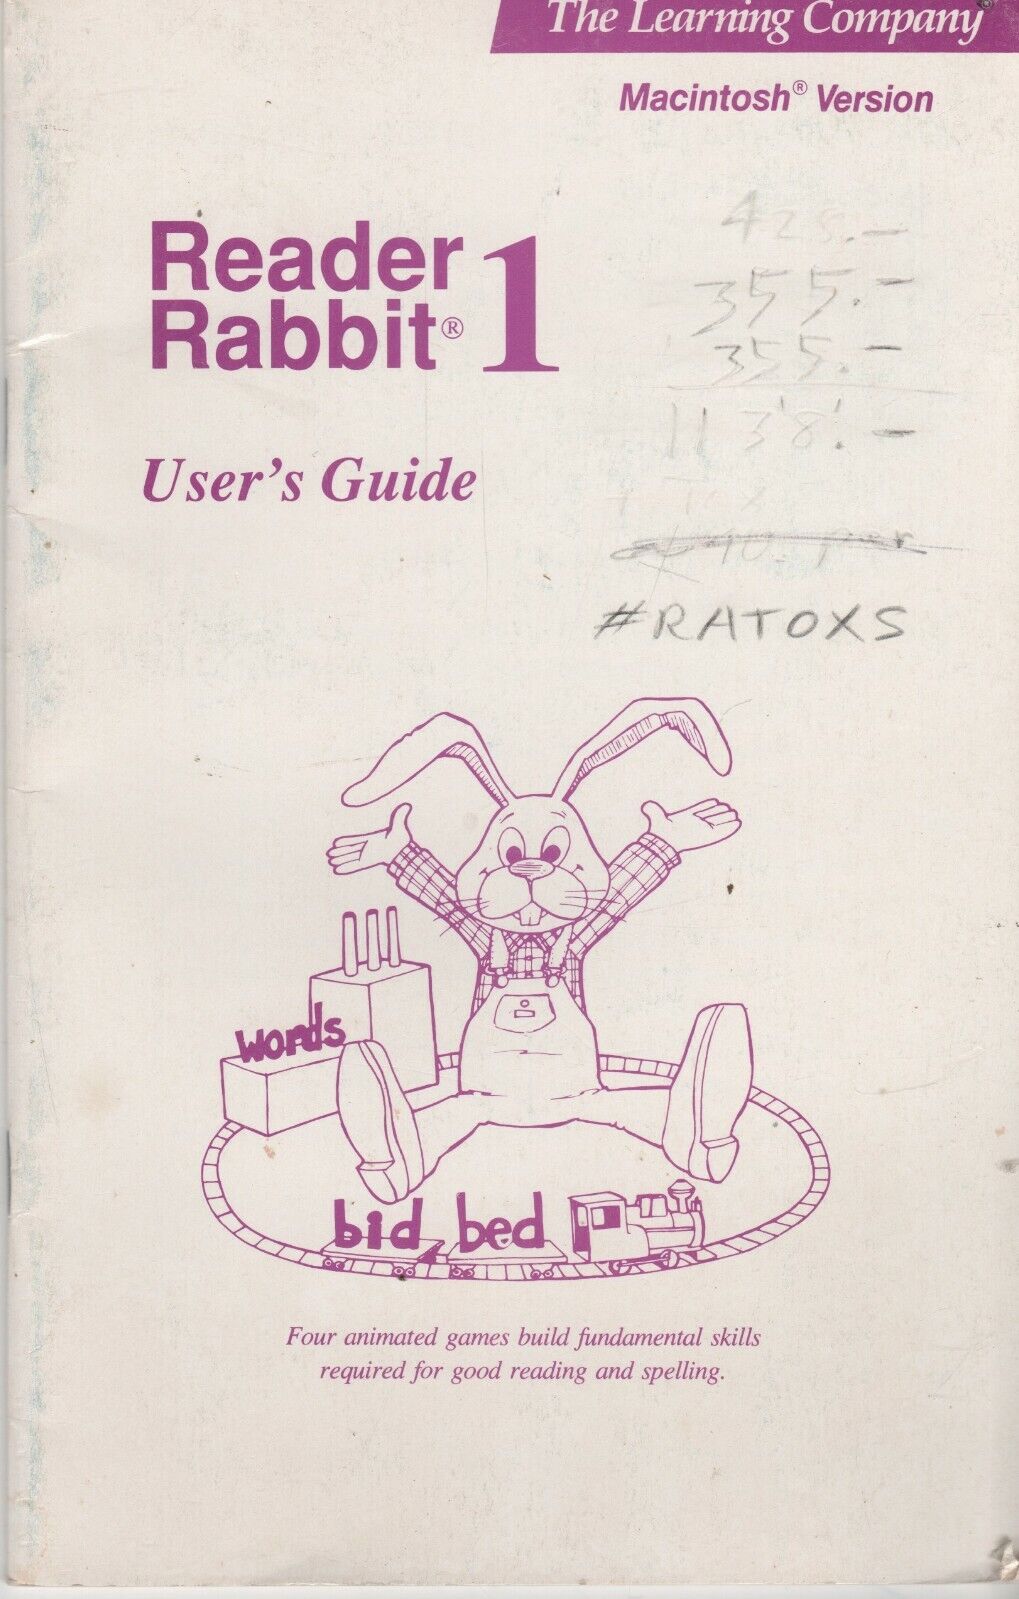 ITHistory (1991) APPLE Software Manual:  READER RABBIT (Mac) The Learning Co